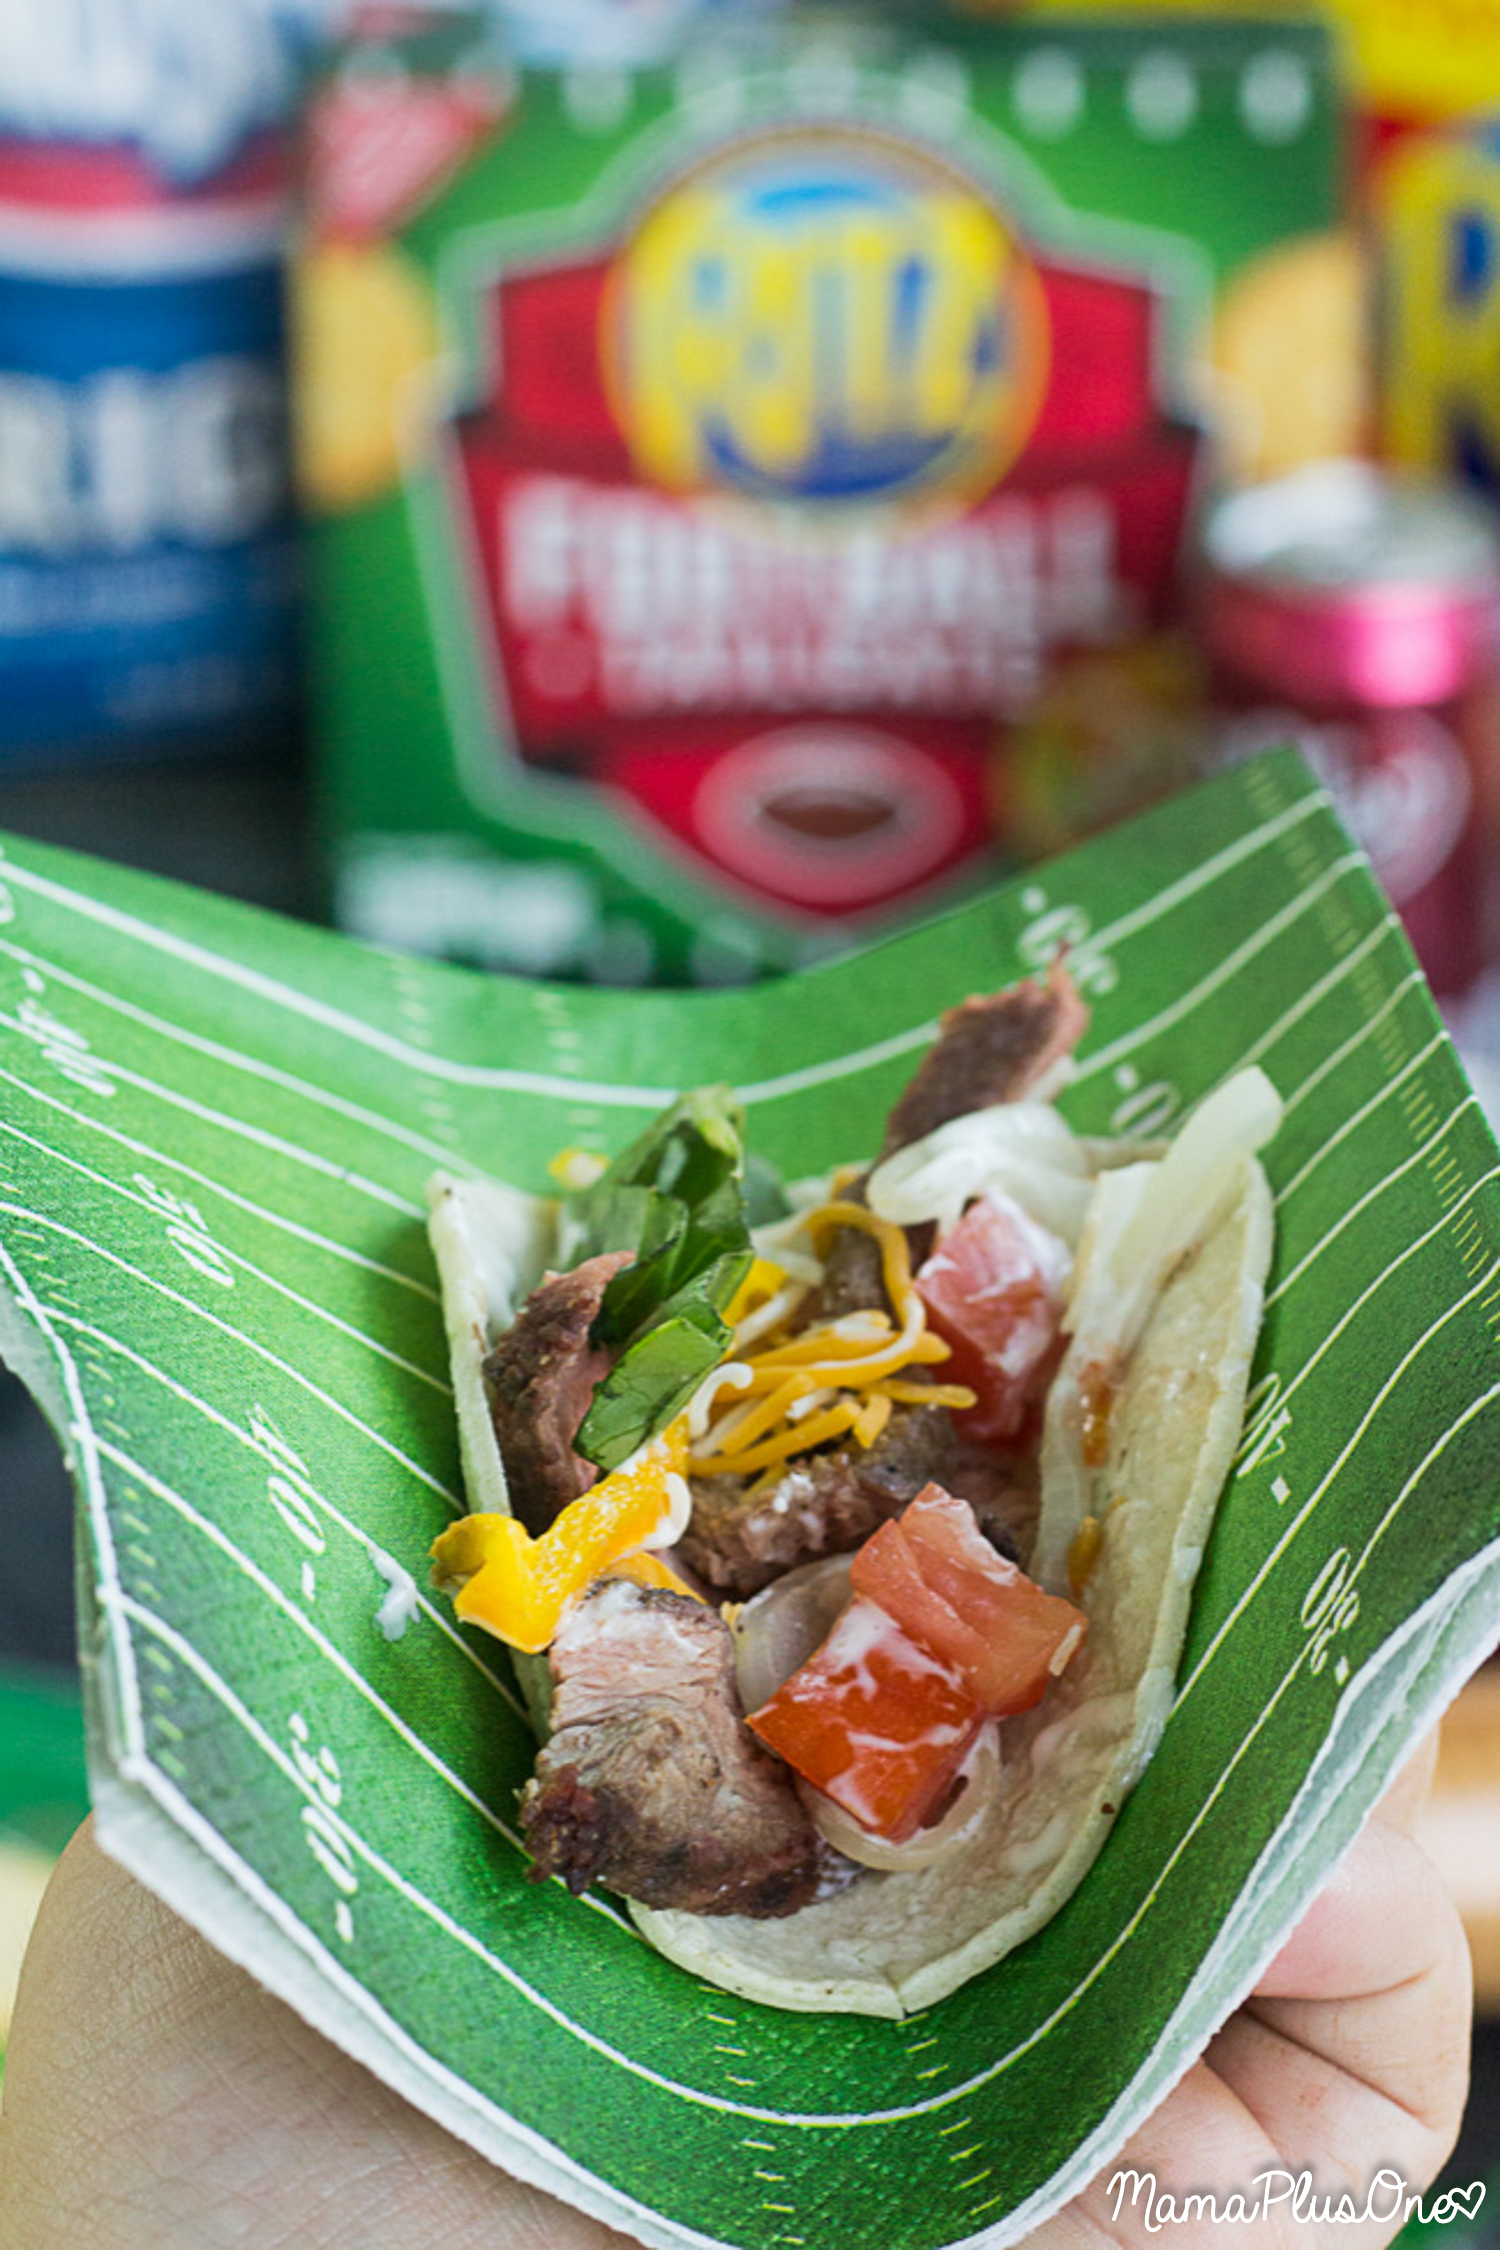 College football season is here which means it's the perfect time for grill-gating, tailgating, and more! This easy Dr Pepper marinated beef and glaze recipe are perfect for game day. Works great on tacos or topping @ritzcrackers! Just marinade, grill, and serve! @coalgrilling #GrillGatingHero #GrillGating